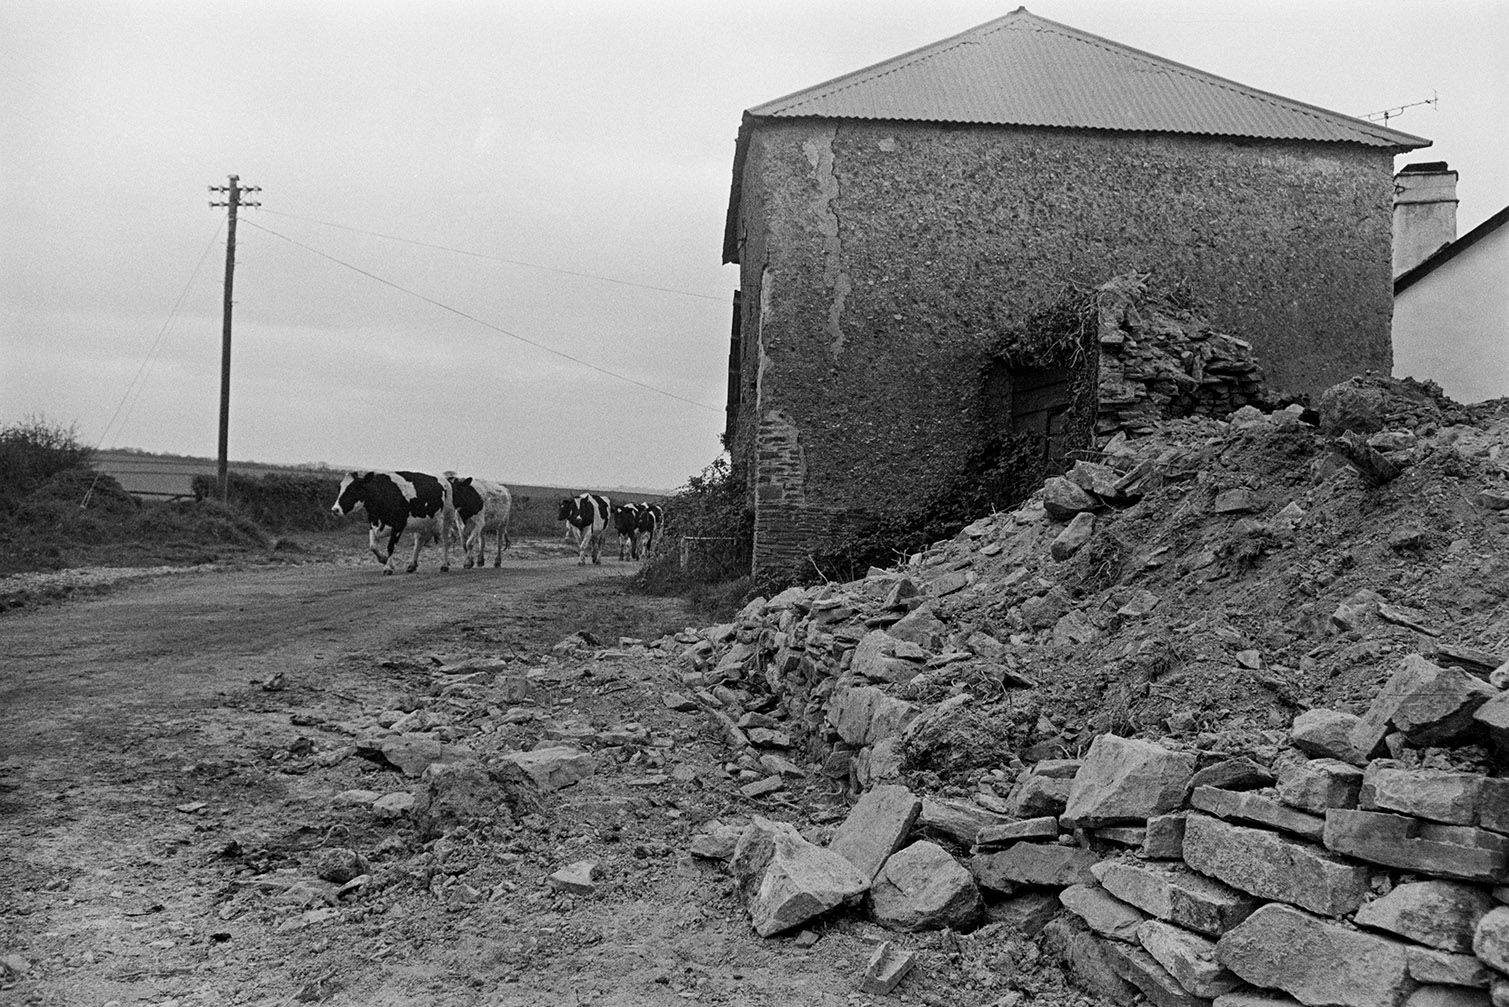 Cattle walking along a road past a cob barn with a corrugated iron roof and a pile of rubble, in Hatherleigh. Rubble from the collapsed building is spreading onto the road.